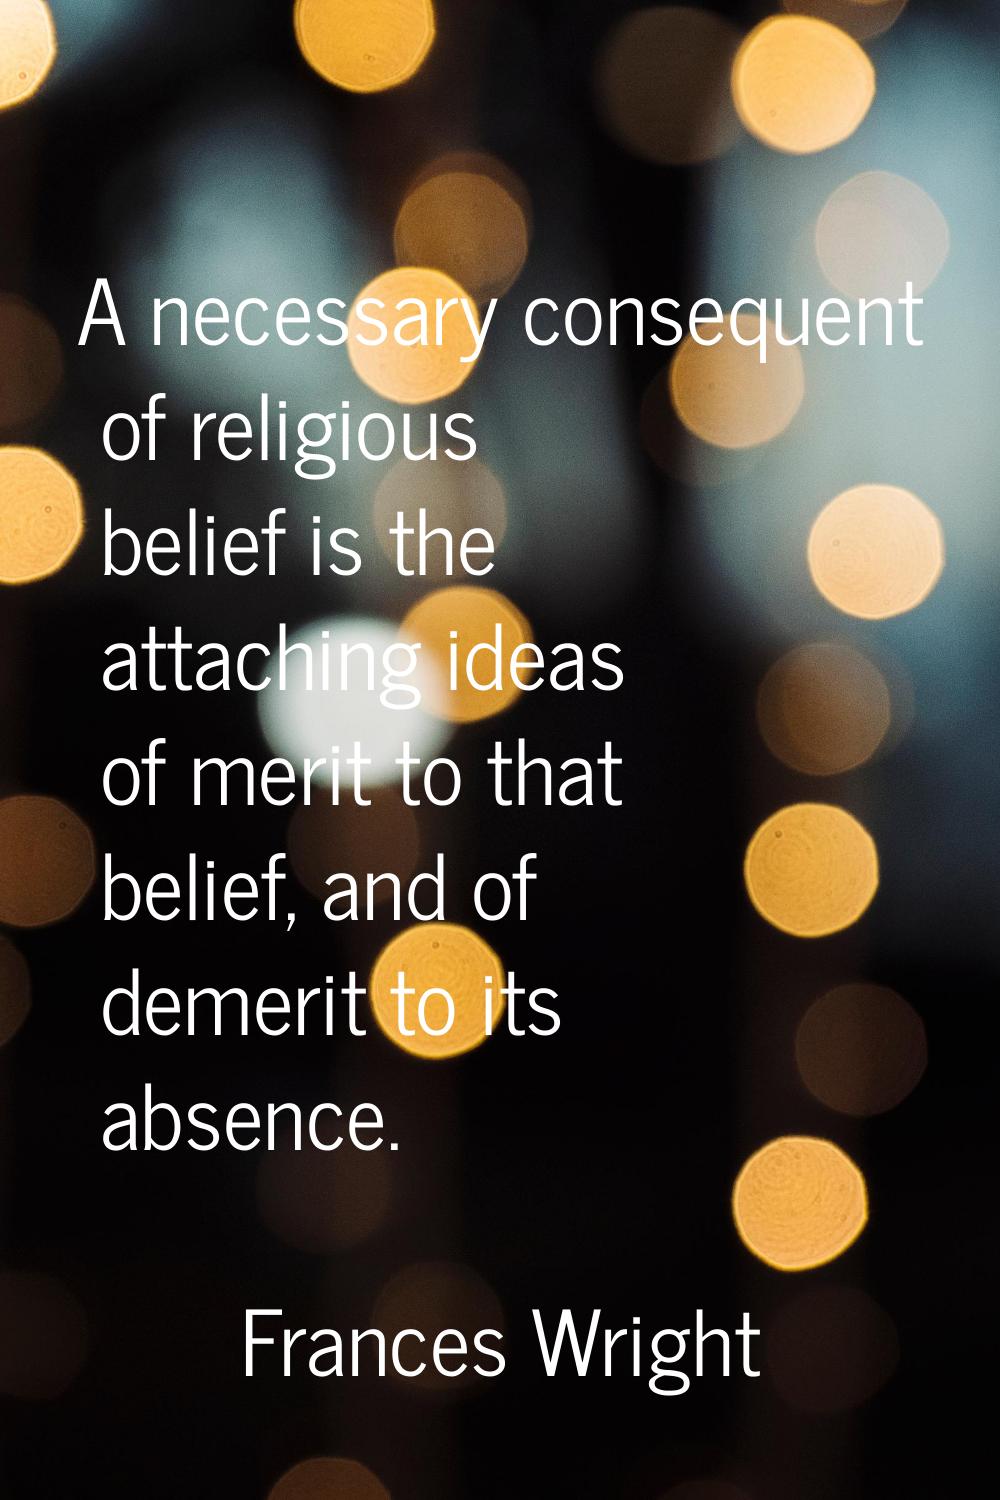 A necessary consequent of religious belief is the attaching ideas of merit to that belief, and of d